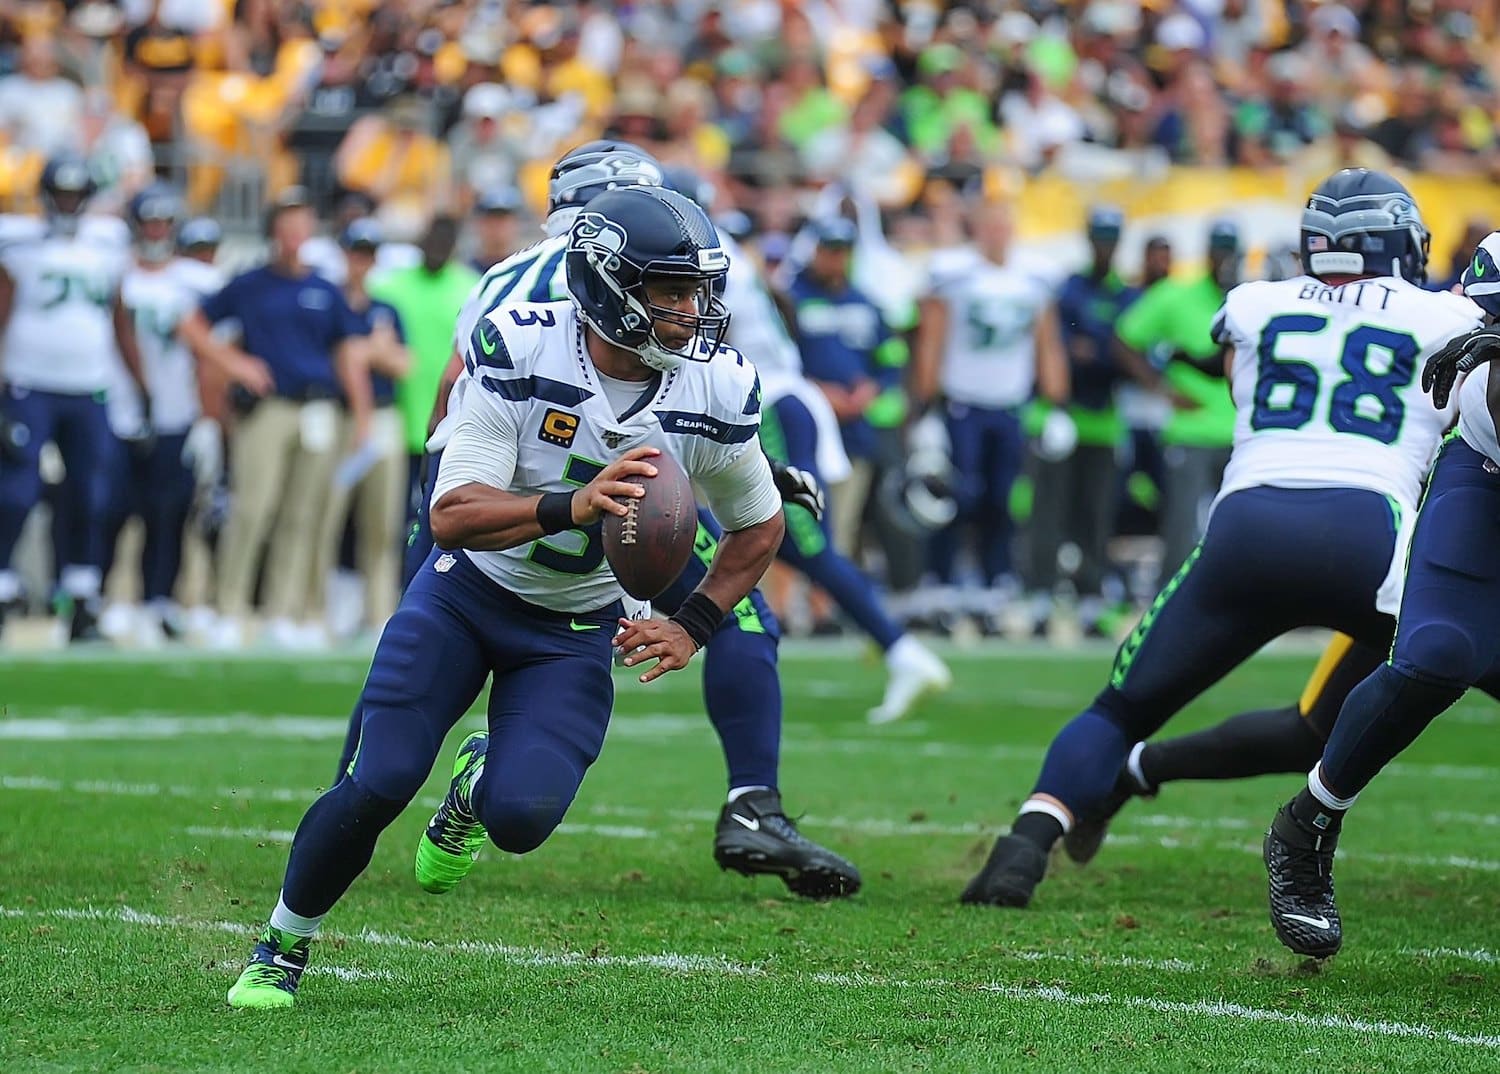 Seattle Seahawks Quarterback Russell Wilson. Photo Credit: Brook Ward | Under Creative Commons License